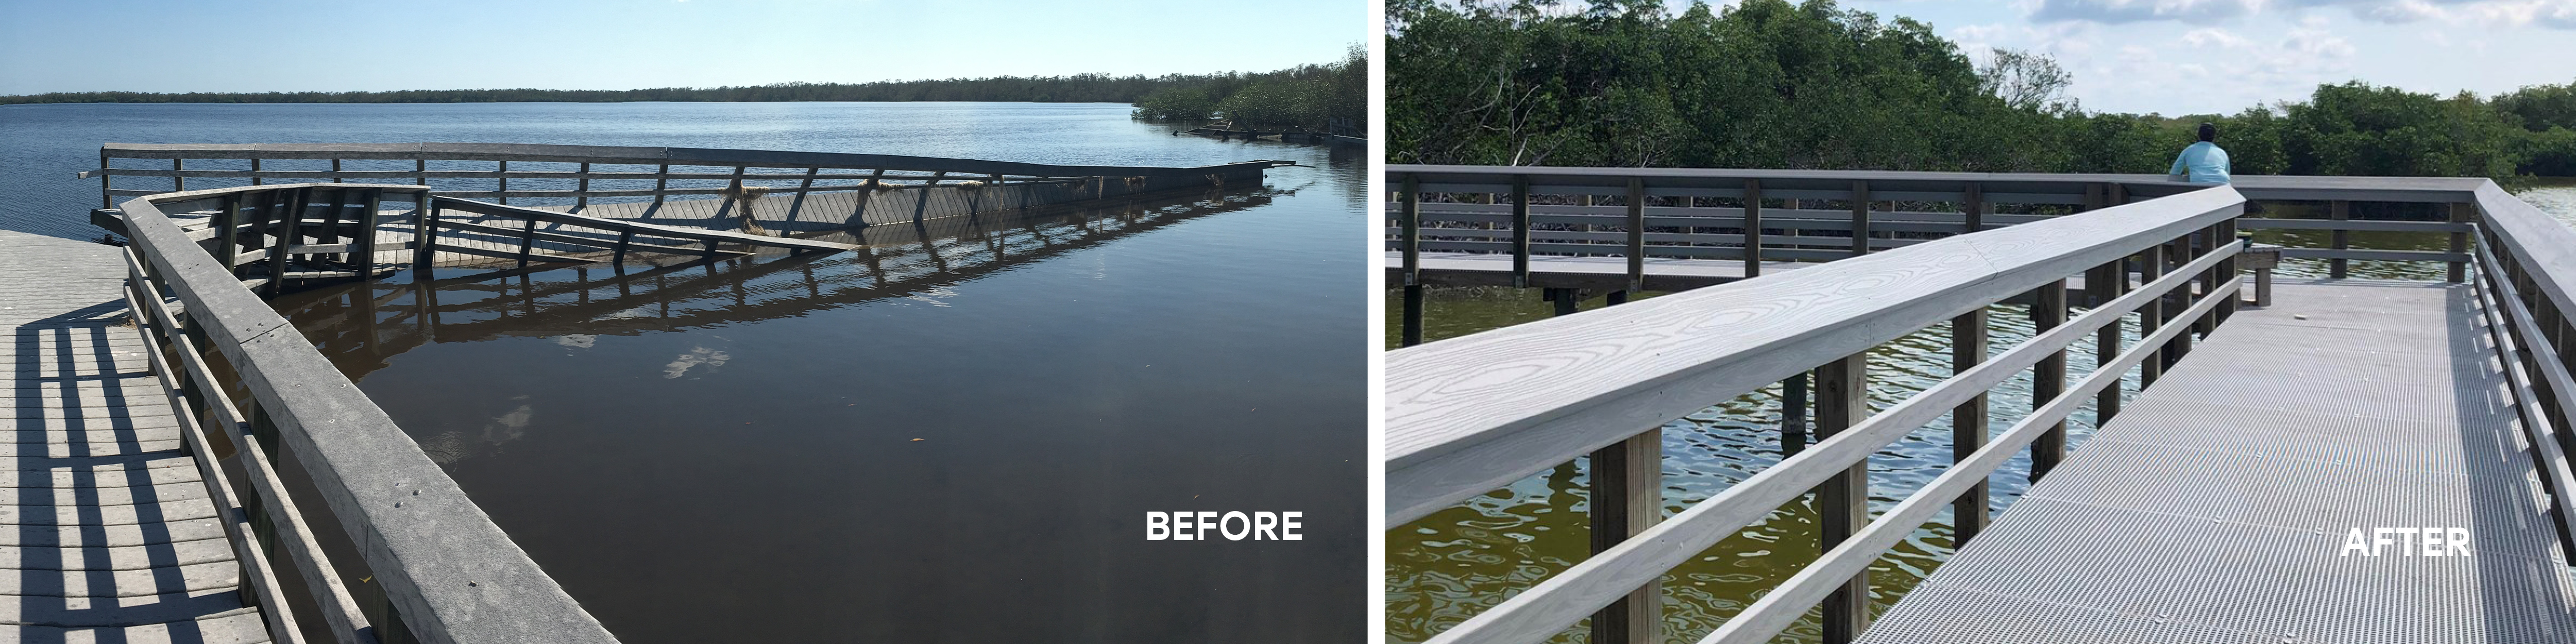 Before and after of the boardwalk.